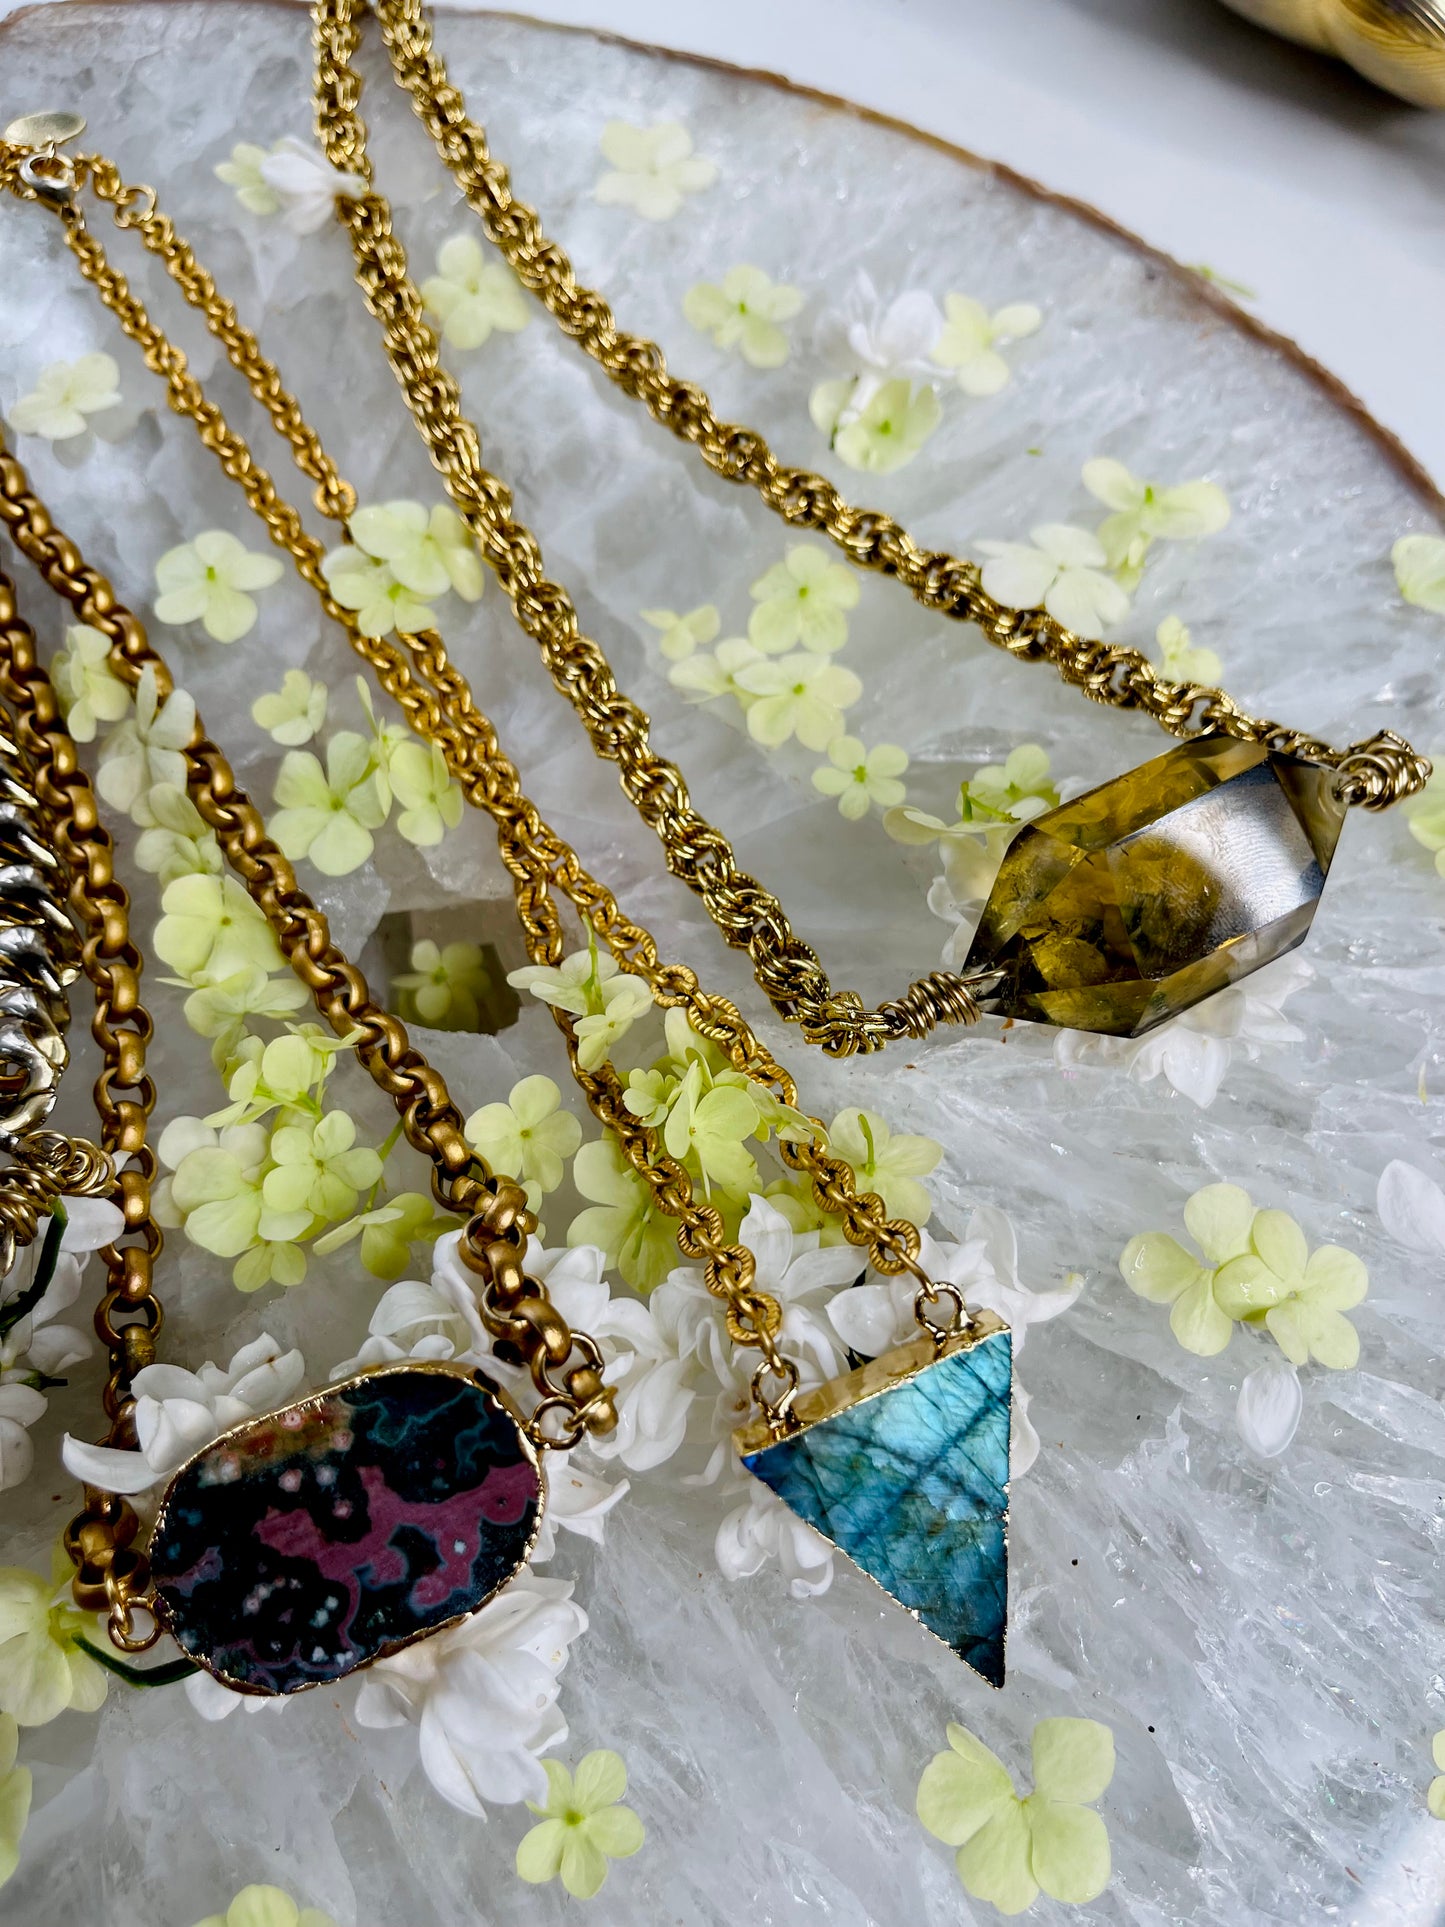 Vintage Chain - Reimagined with Energy Infused Labradorite  Crystal